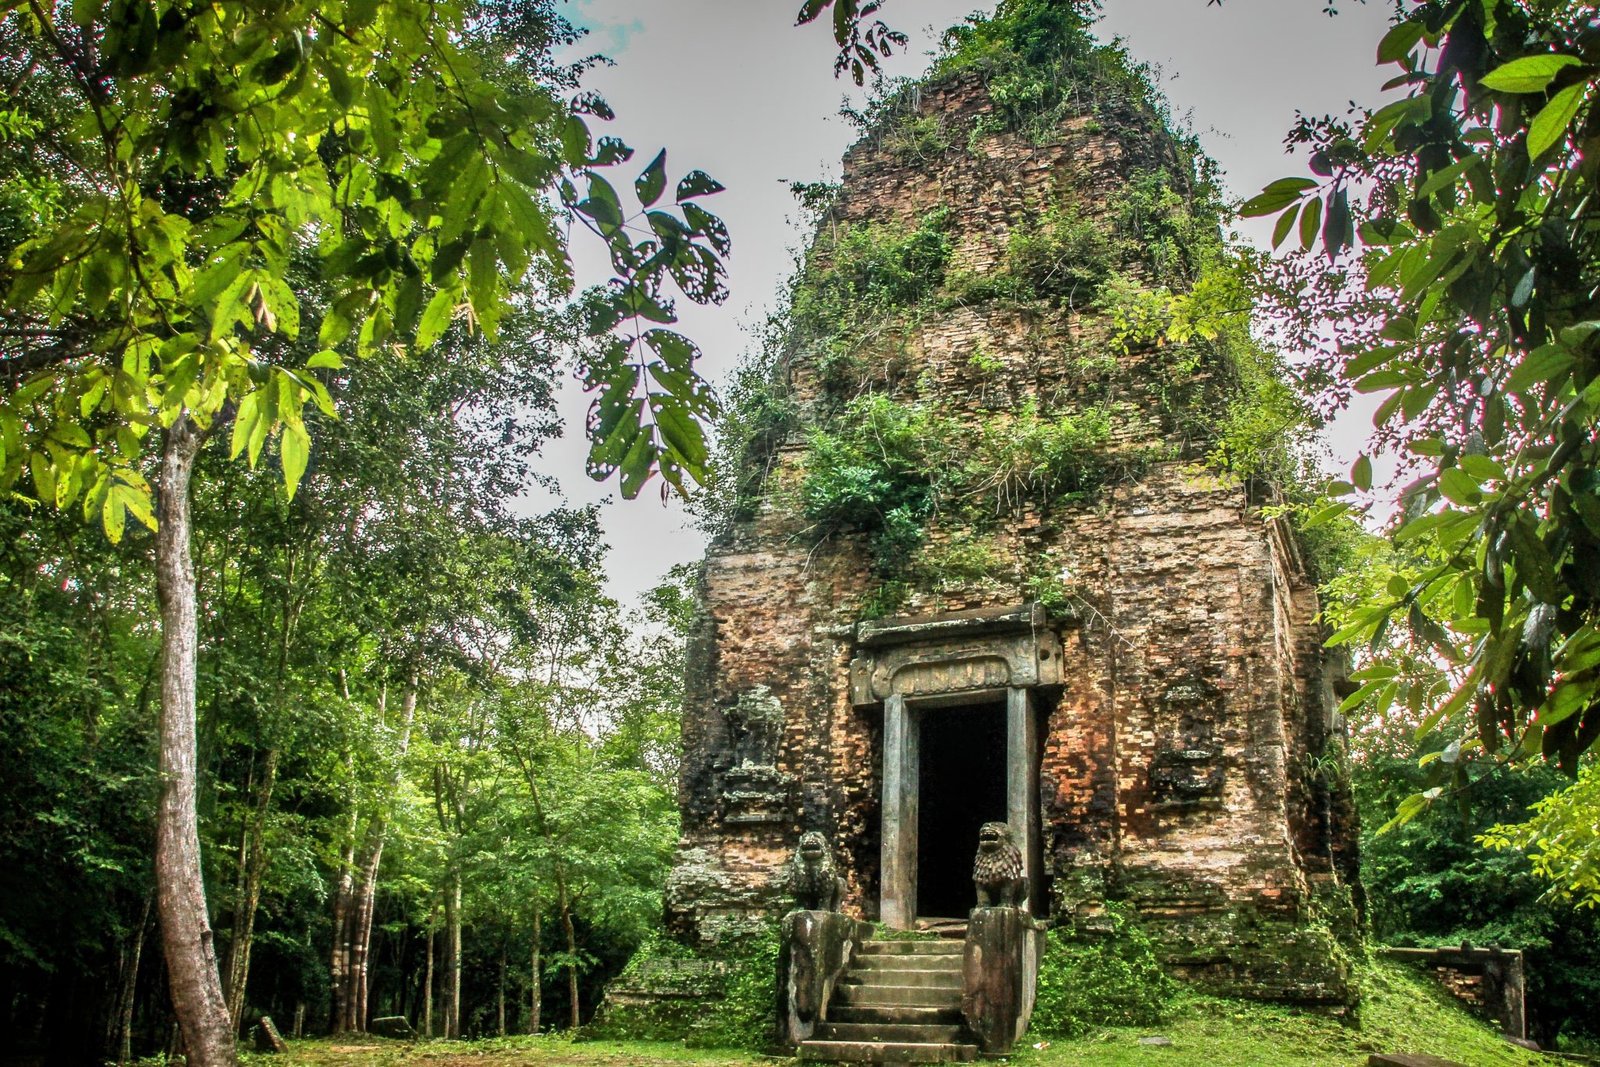 Prasat Sambor Prei Kuk, Prasat Sambor Prei Kuk: A Testament to the Ingenuity and Spirit of Early Khmer Civilization